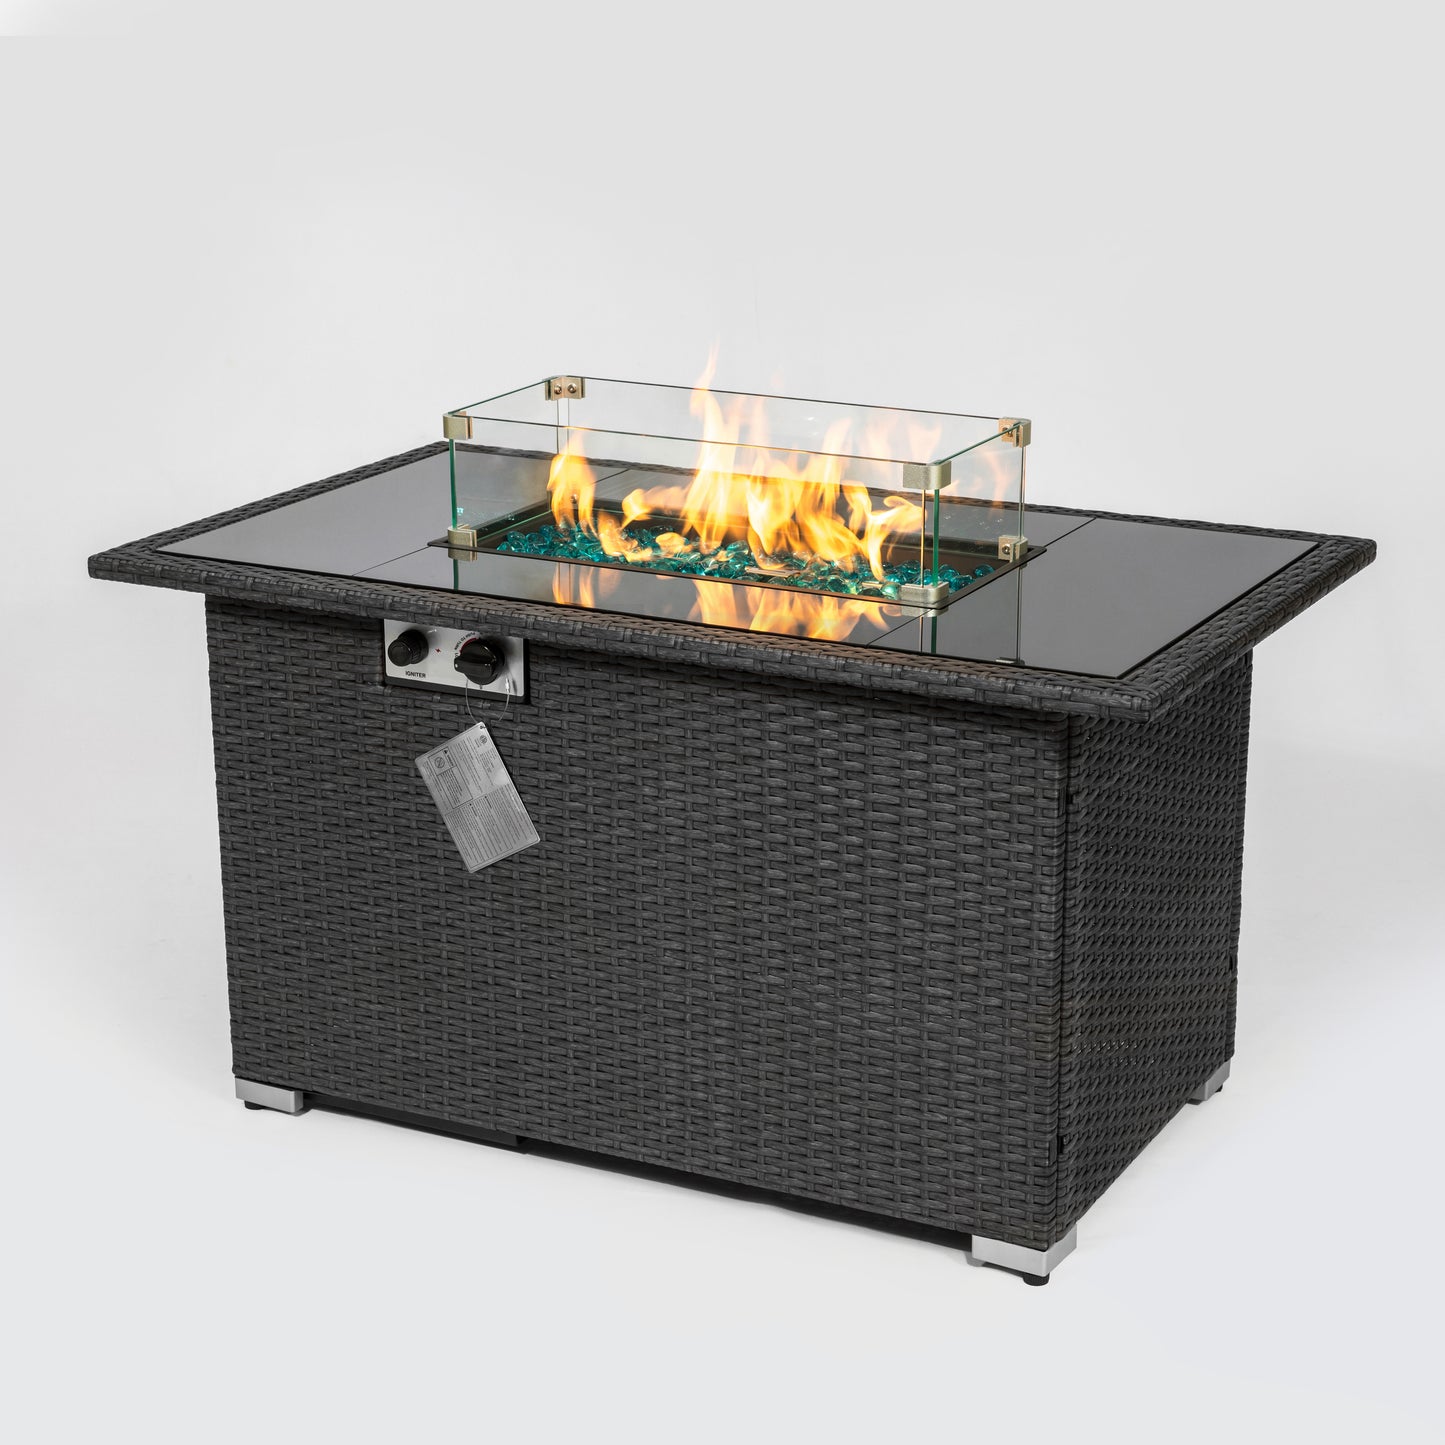 44 Gas Propane Fire Pit Table with 50,000 BTU and ETL Certification (Grey)